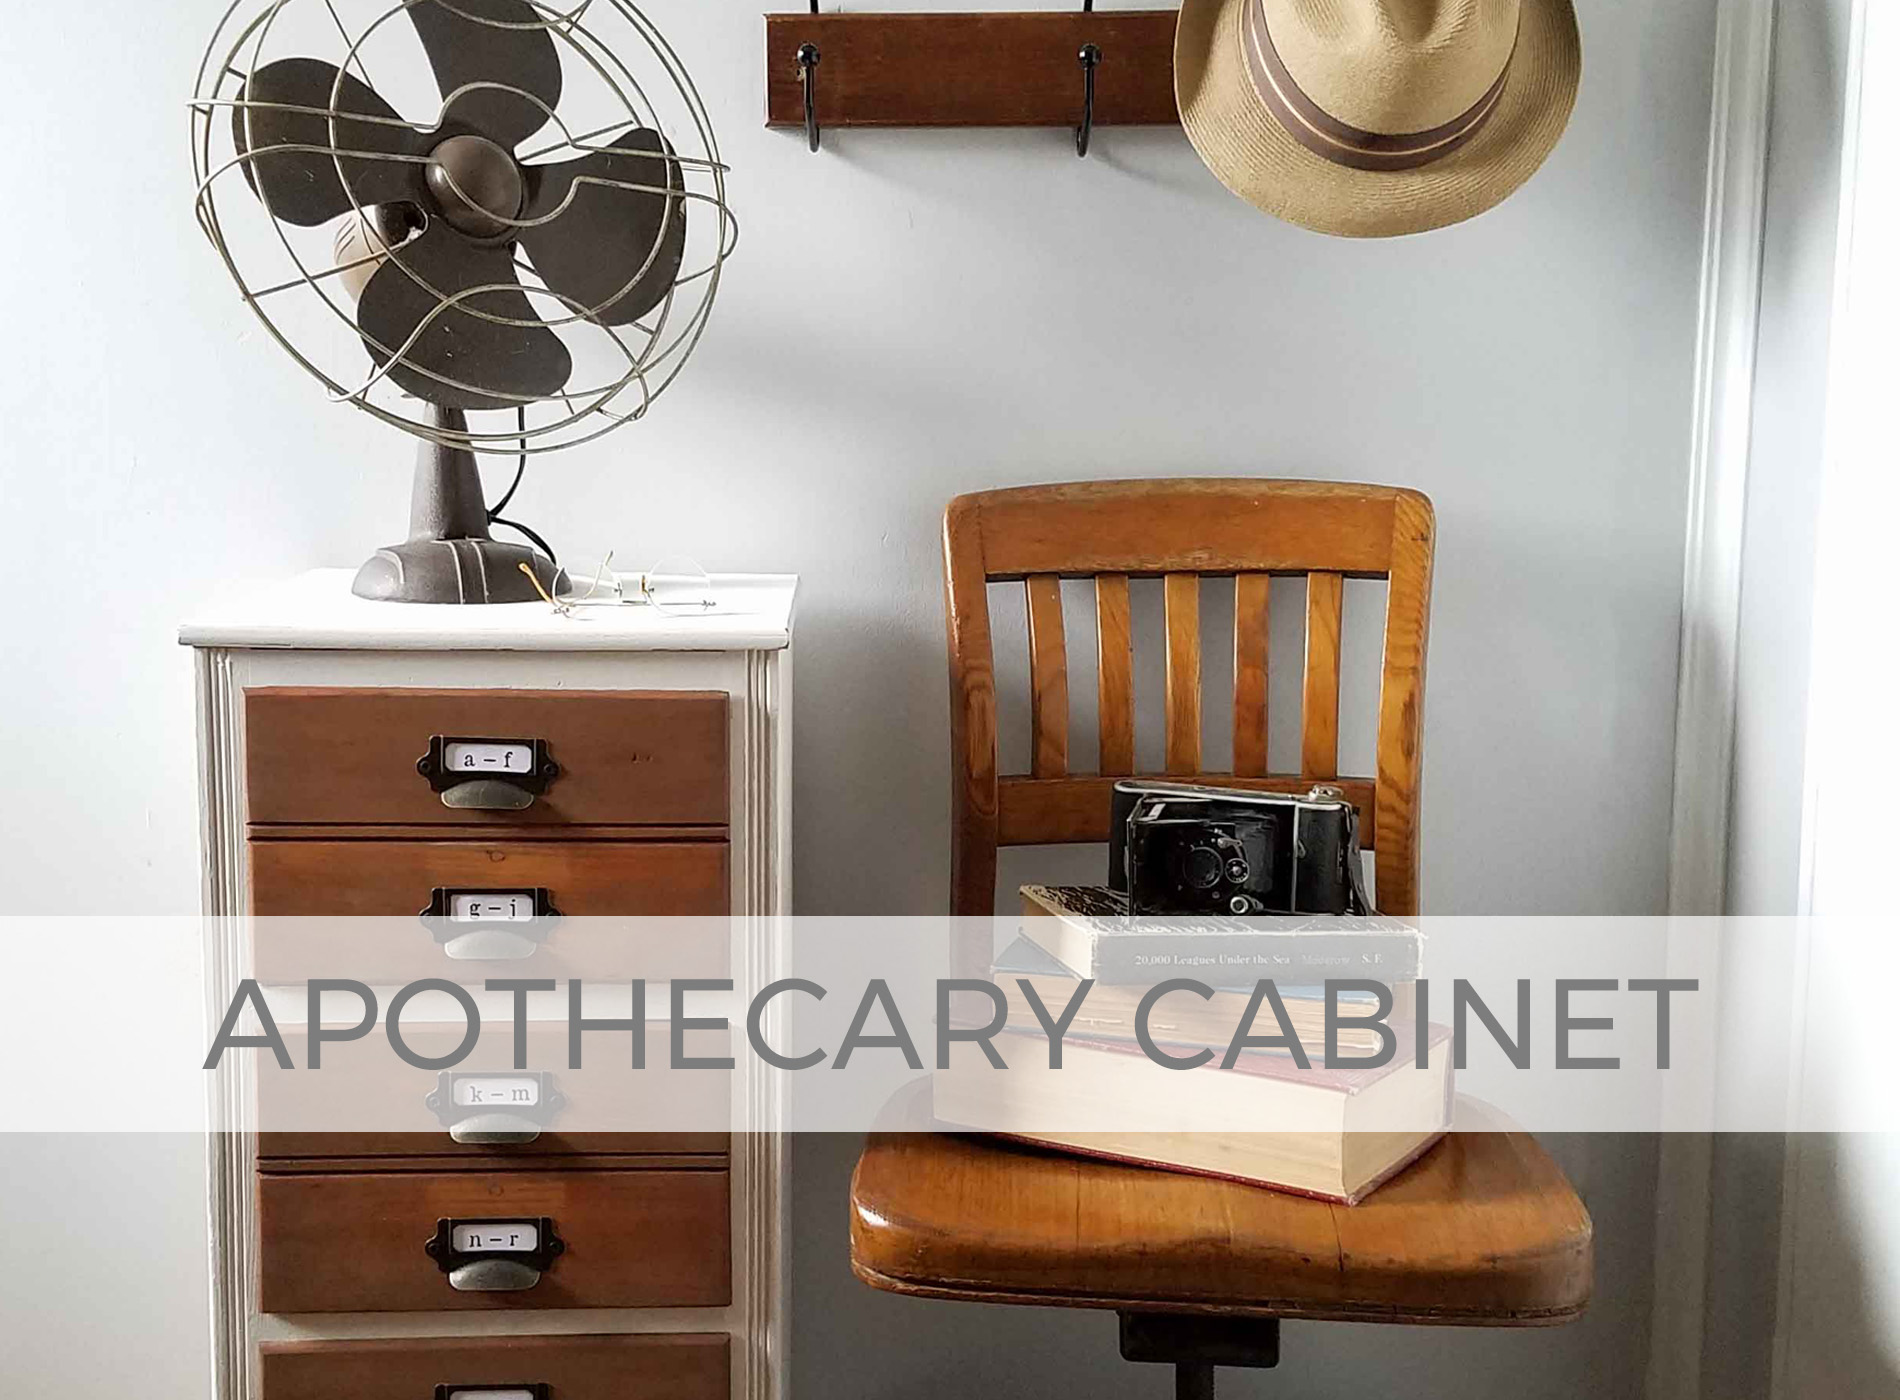 Vintage Apothecary Cabinet by Larissa of Prodigal Pieces | prodigalpieces.com #prodigalpieces